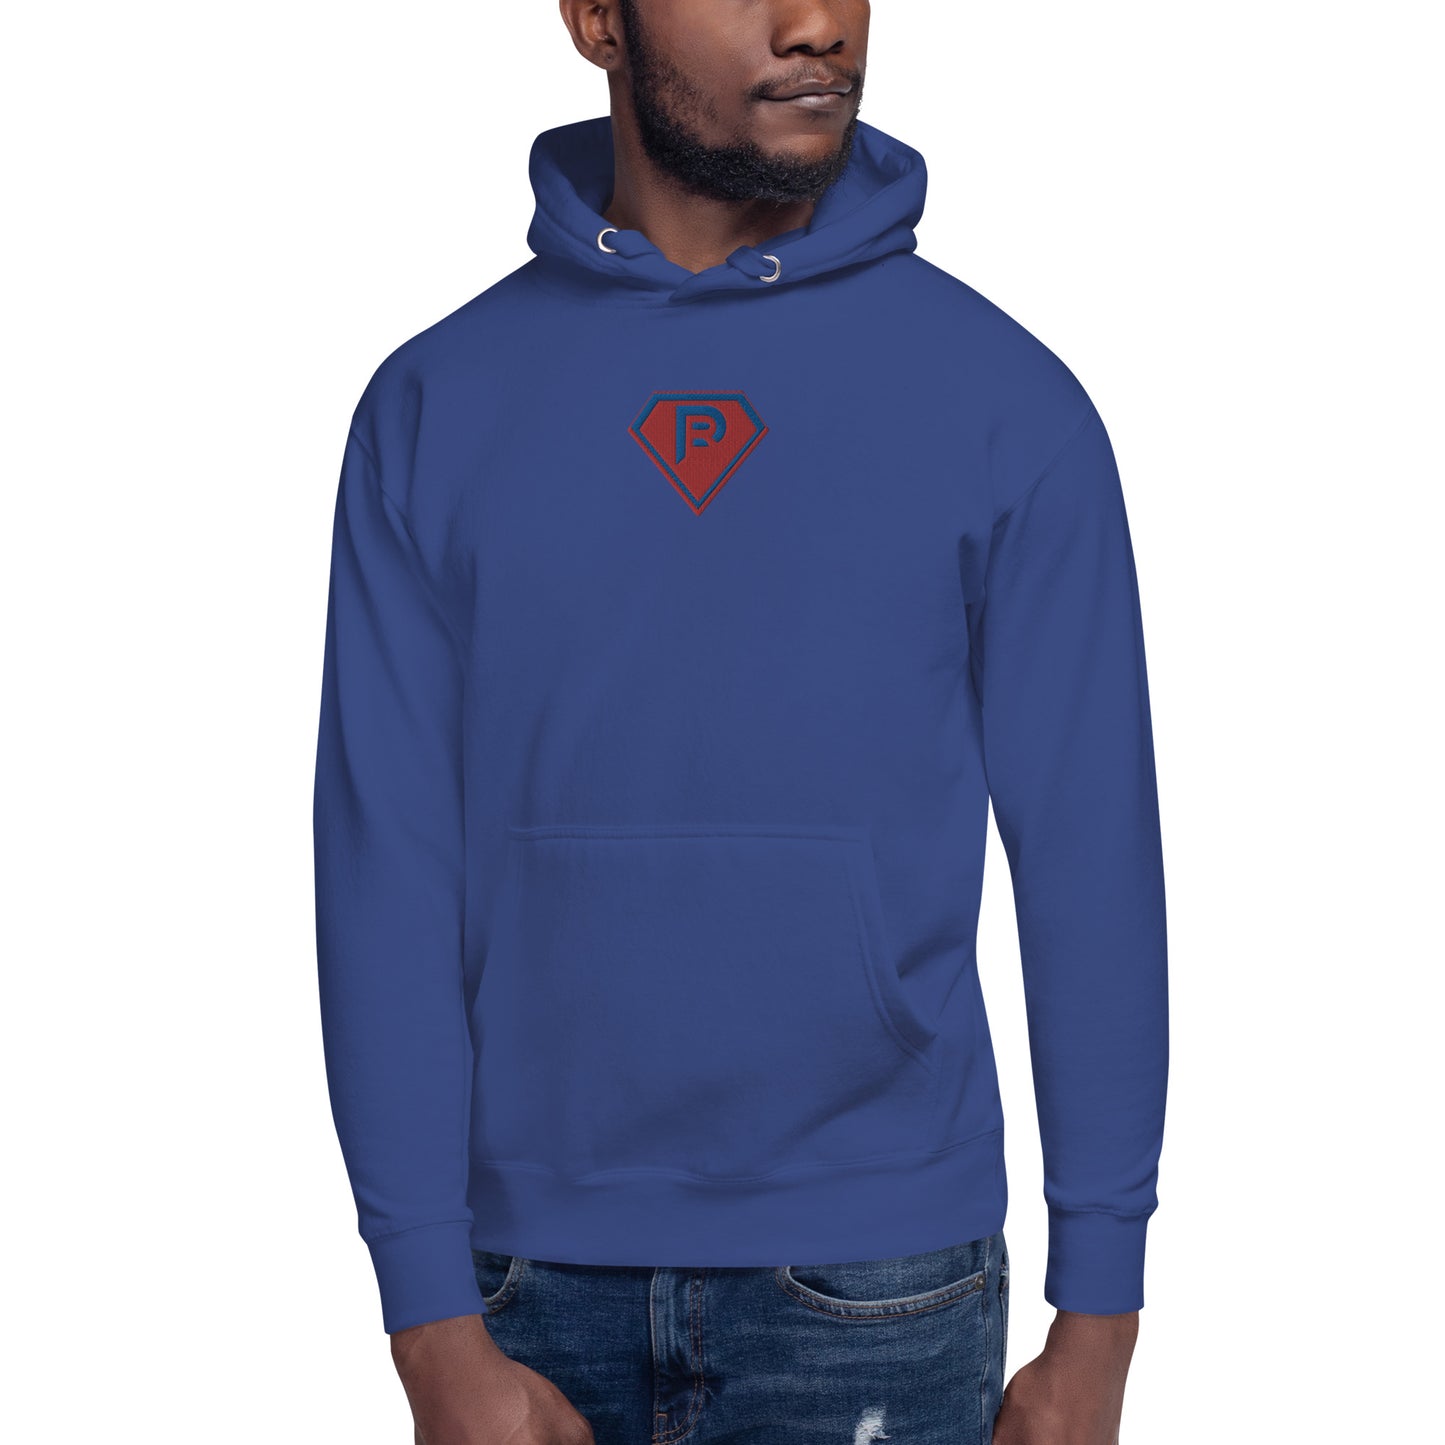 Red Weapon Super Power Hoodie